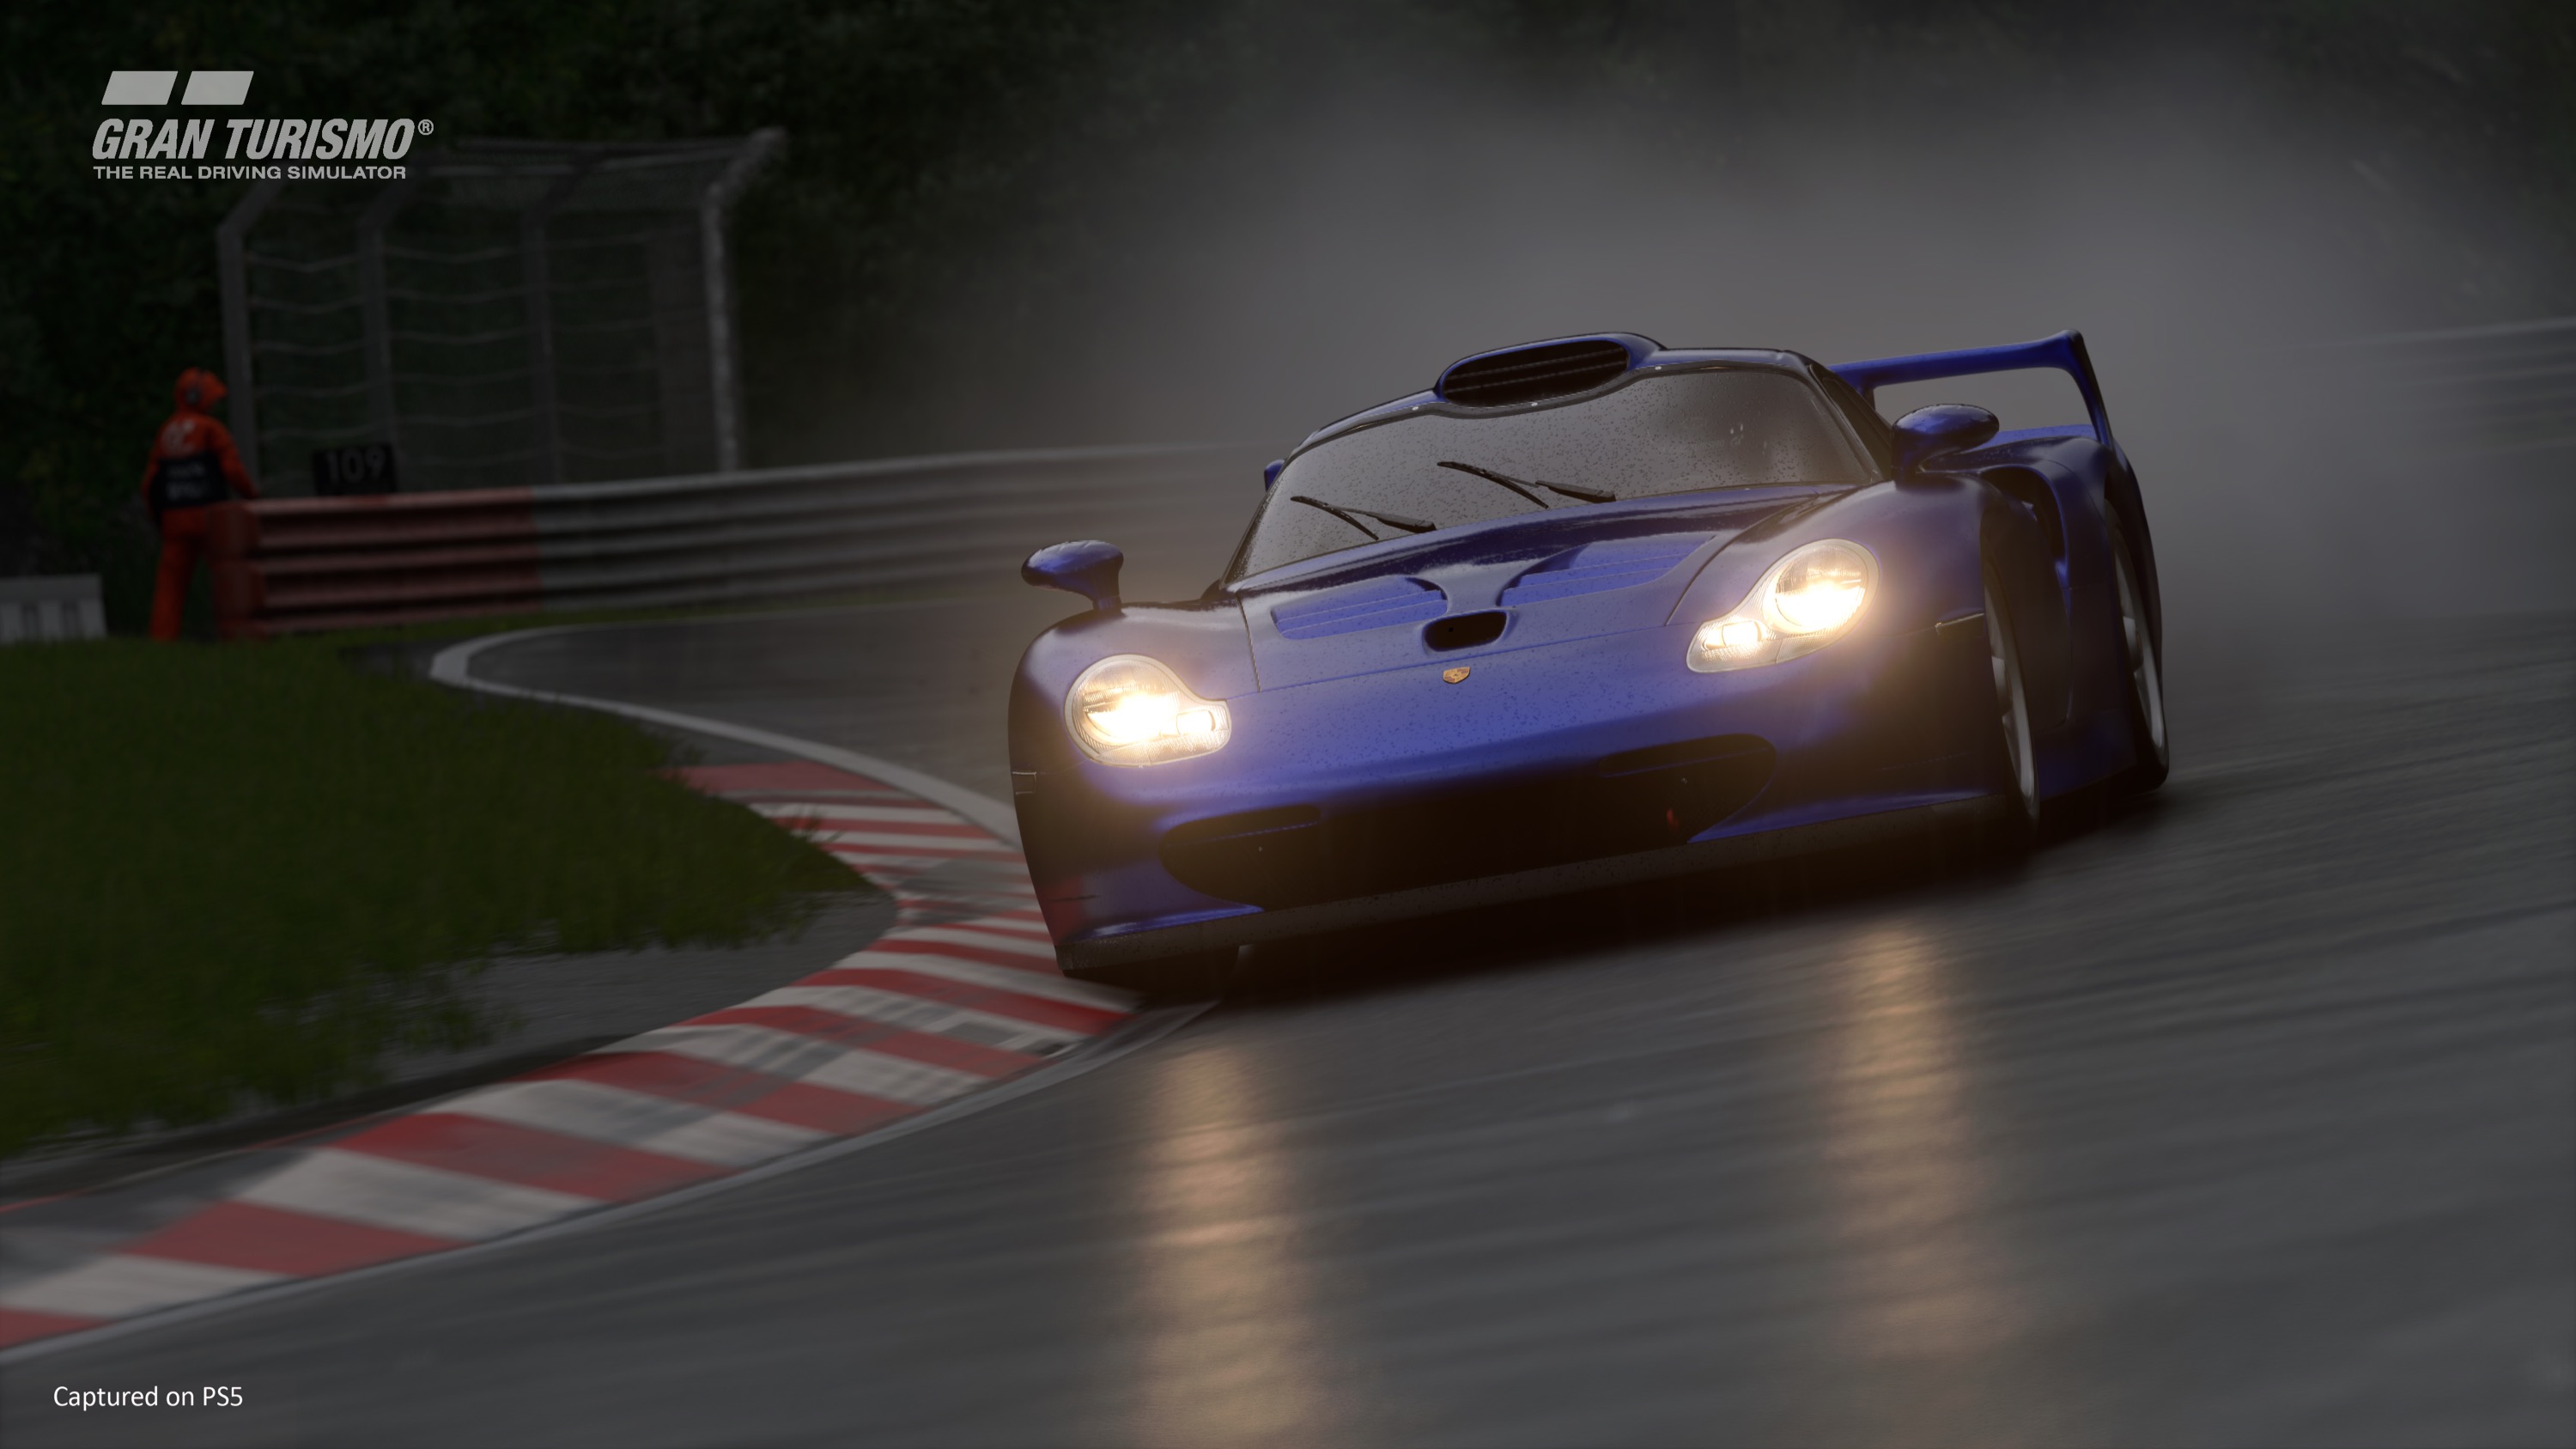 Gran Turismo 7 Has at Least One Big Difference Between PS4 and PS5 Versions